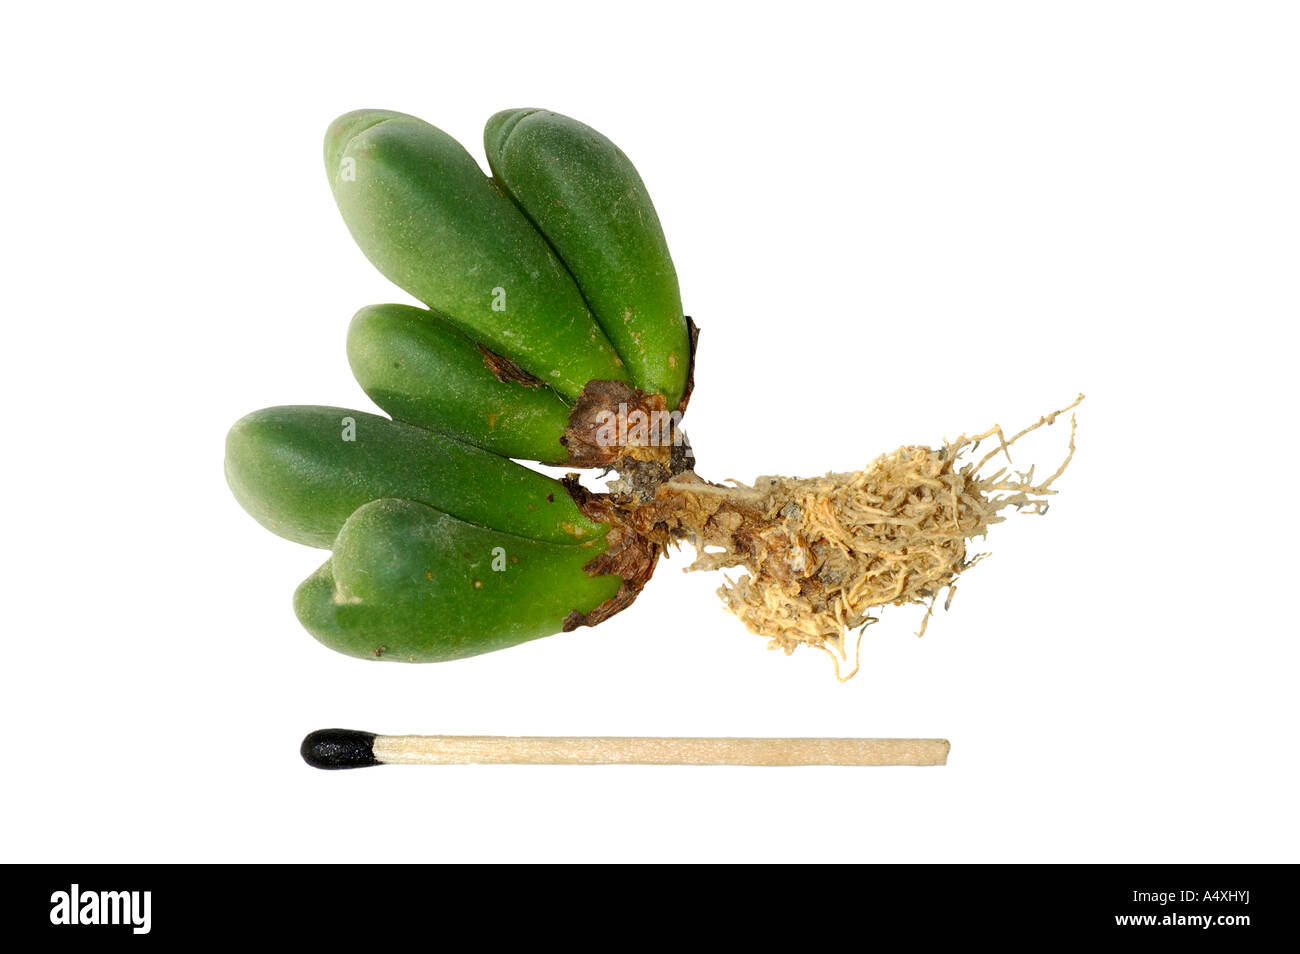 Conophytum meyeri, pant body with roots in comparison to a match Stock Photo